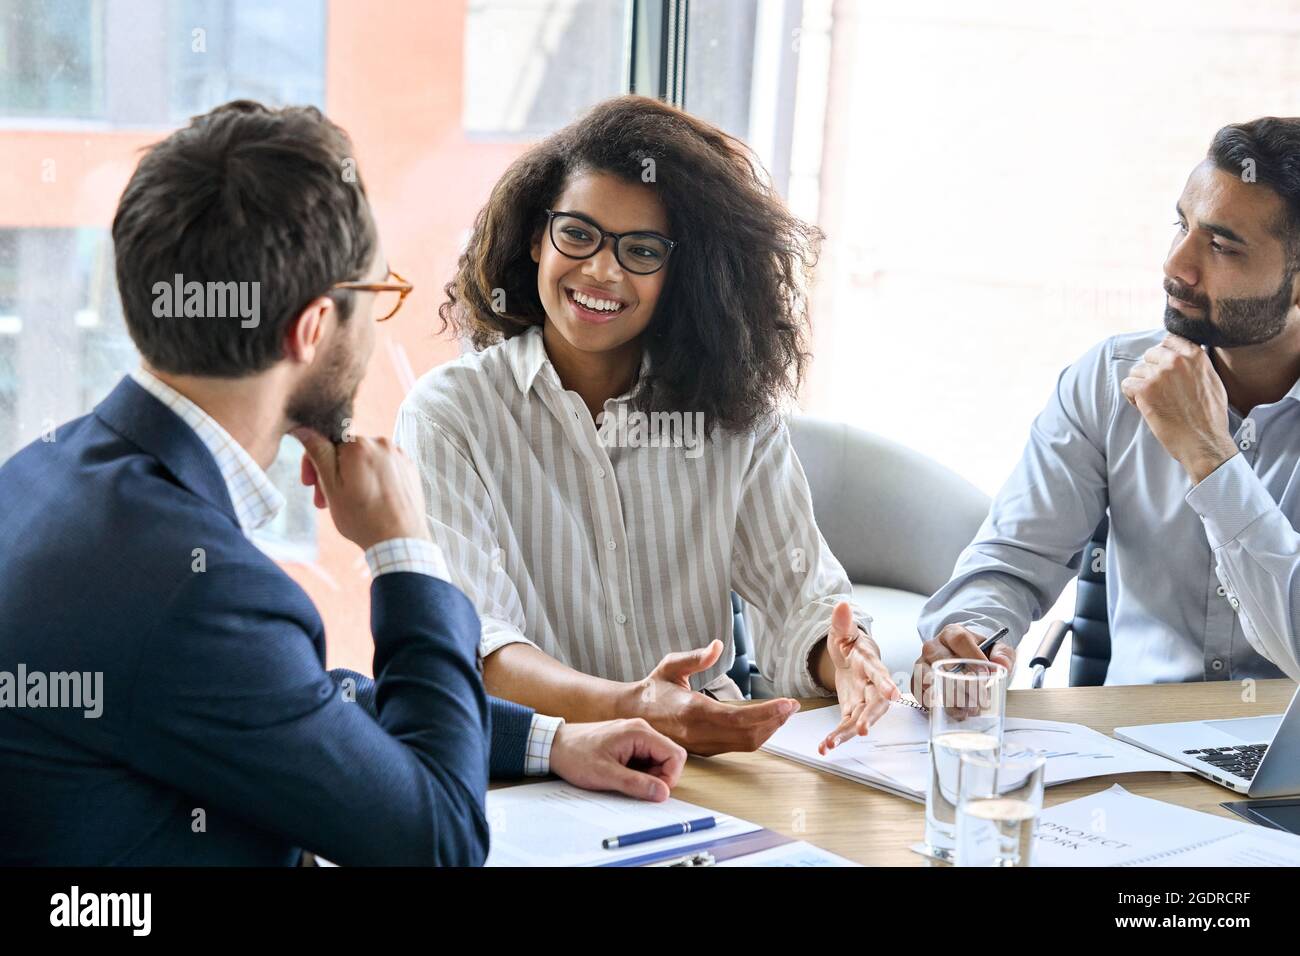 International corporate business team discussing business project at boardroom. Stock Photo